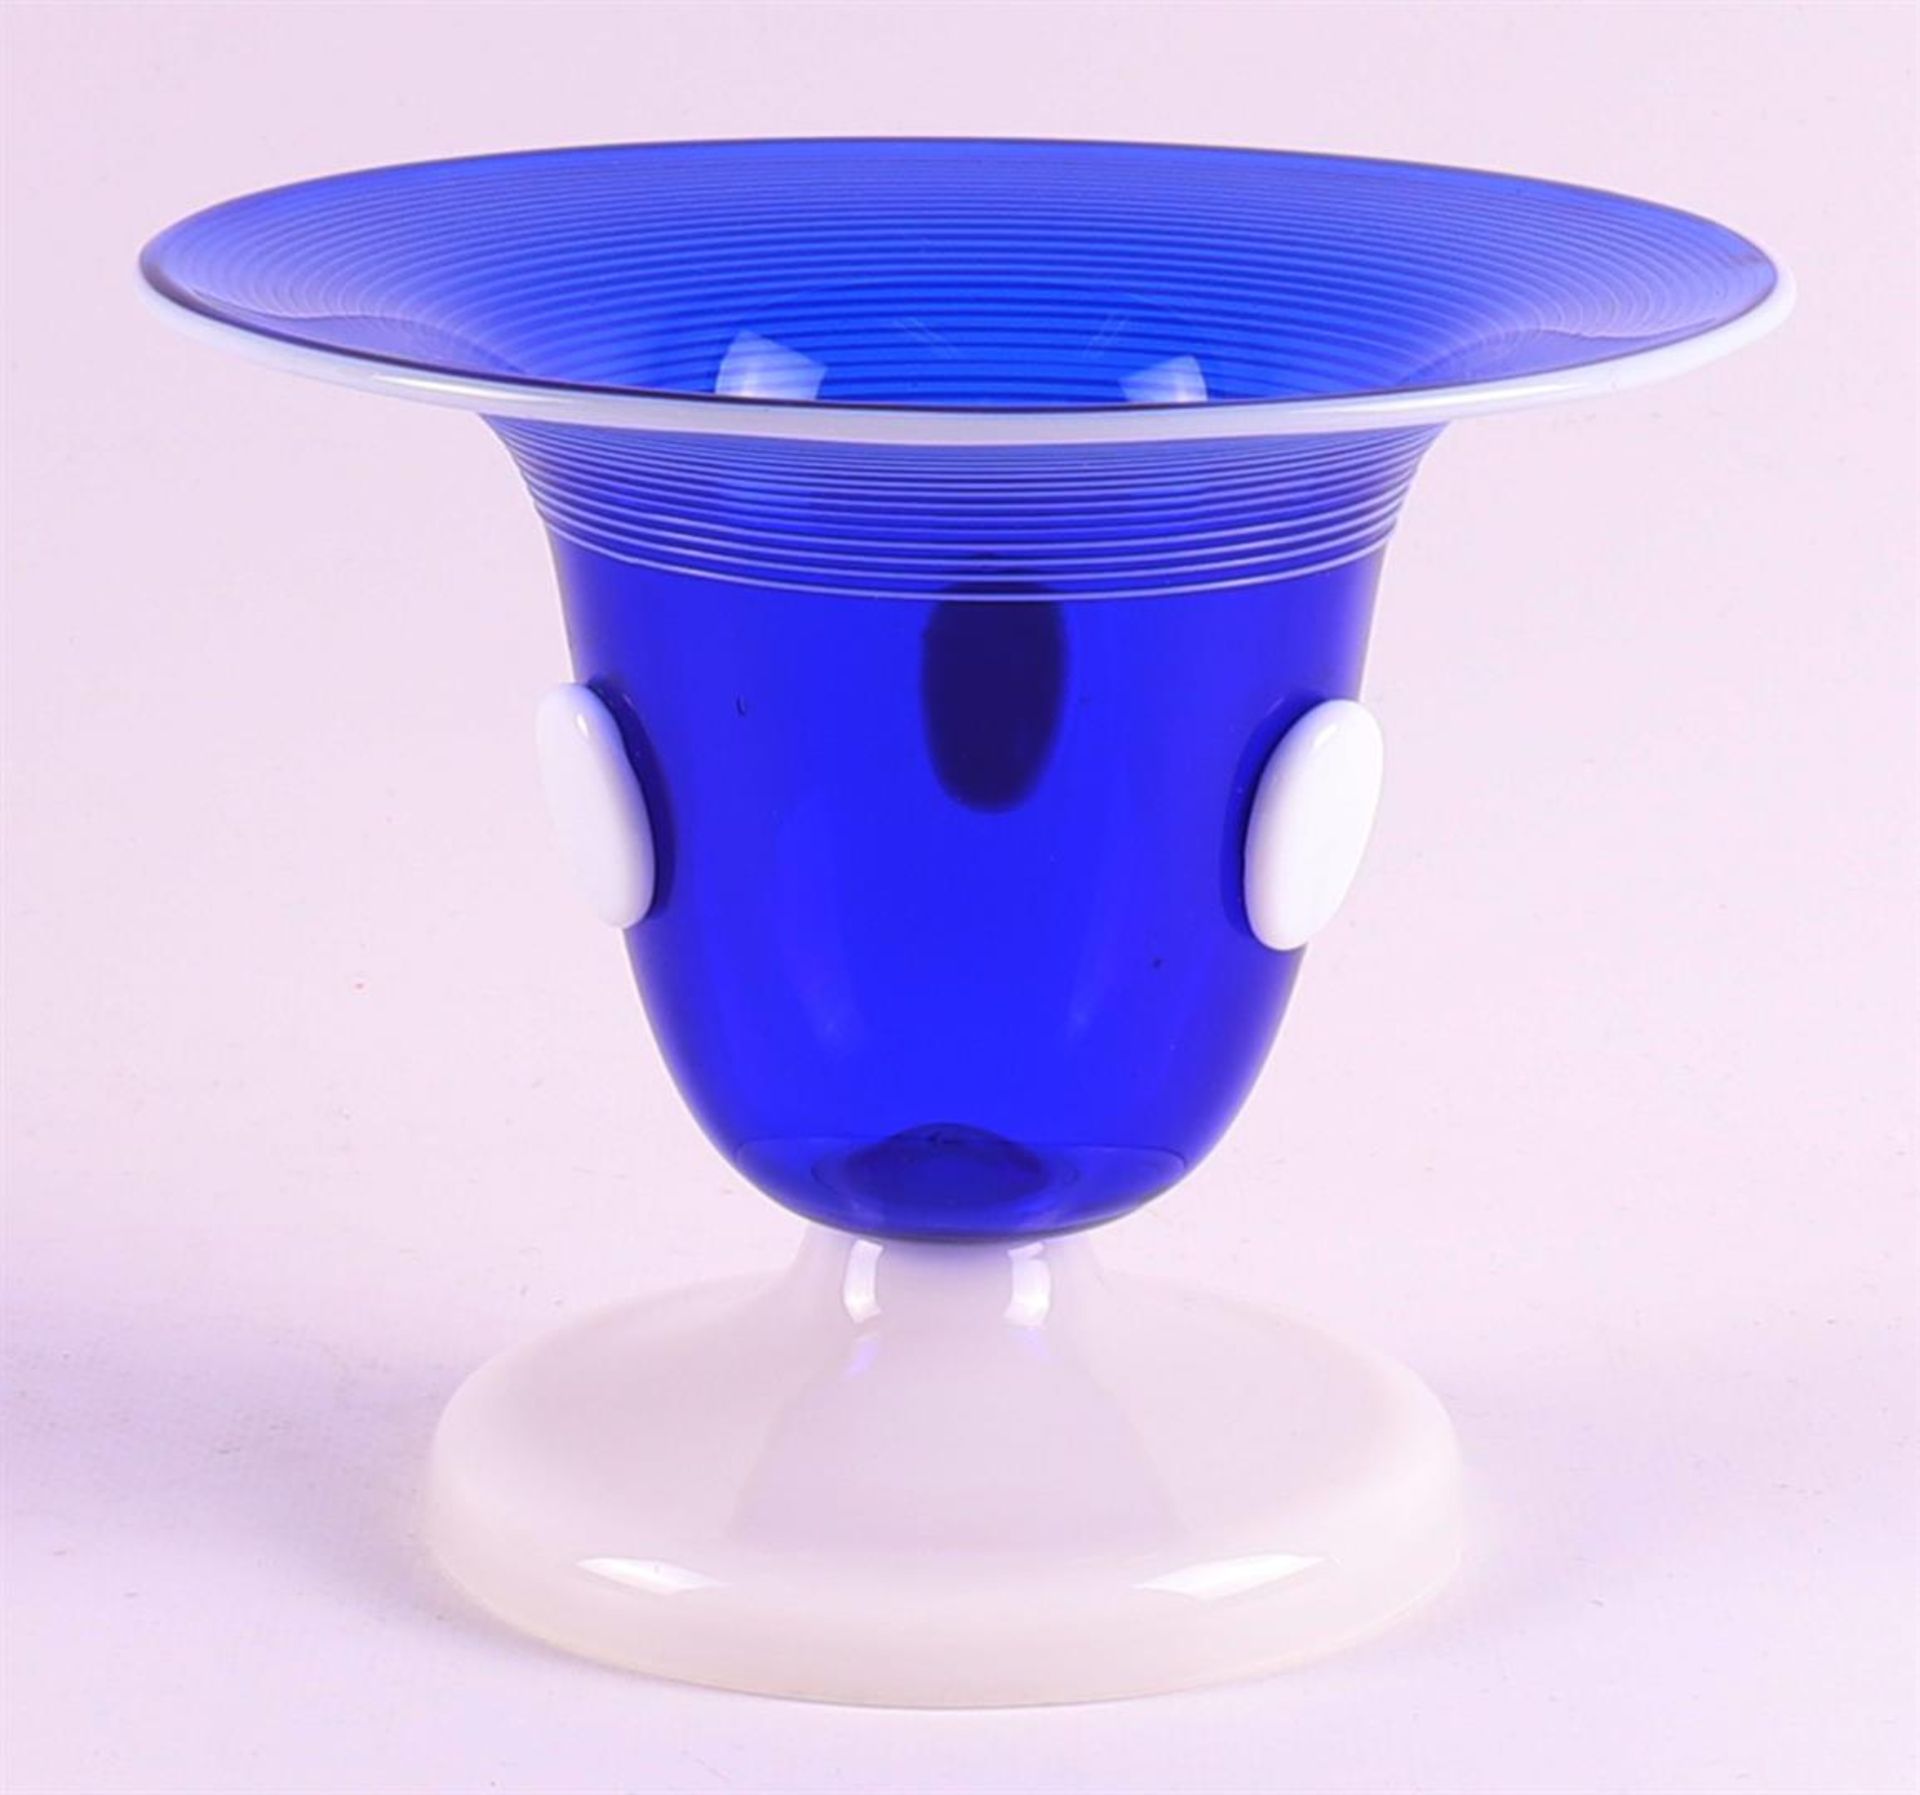 A blue glass vase with white overlay, Loetz Witwe Klostermuehle, 1910-1930. - Image 2 of 4